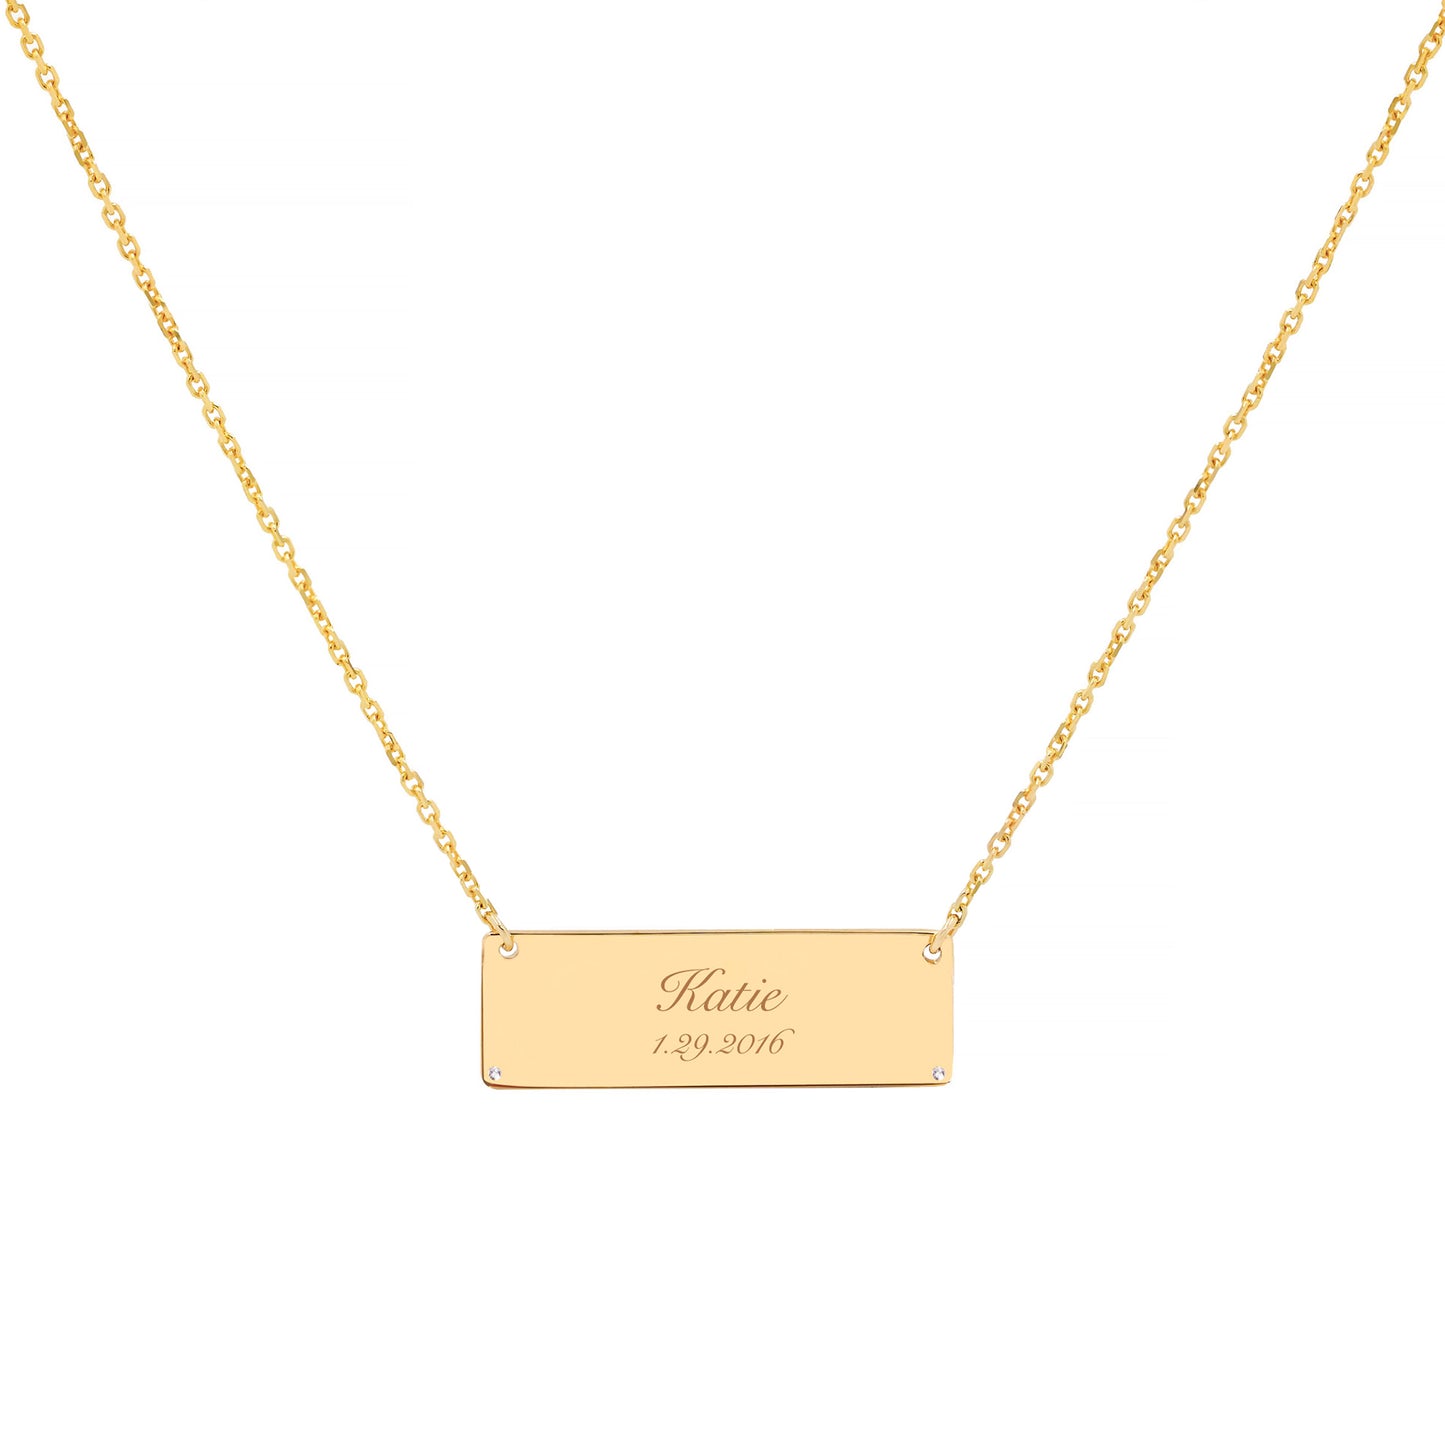 Footprints Mathis LOVE Necklace in 14K Gold with Diamonds